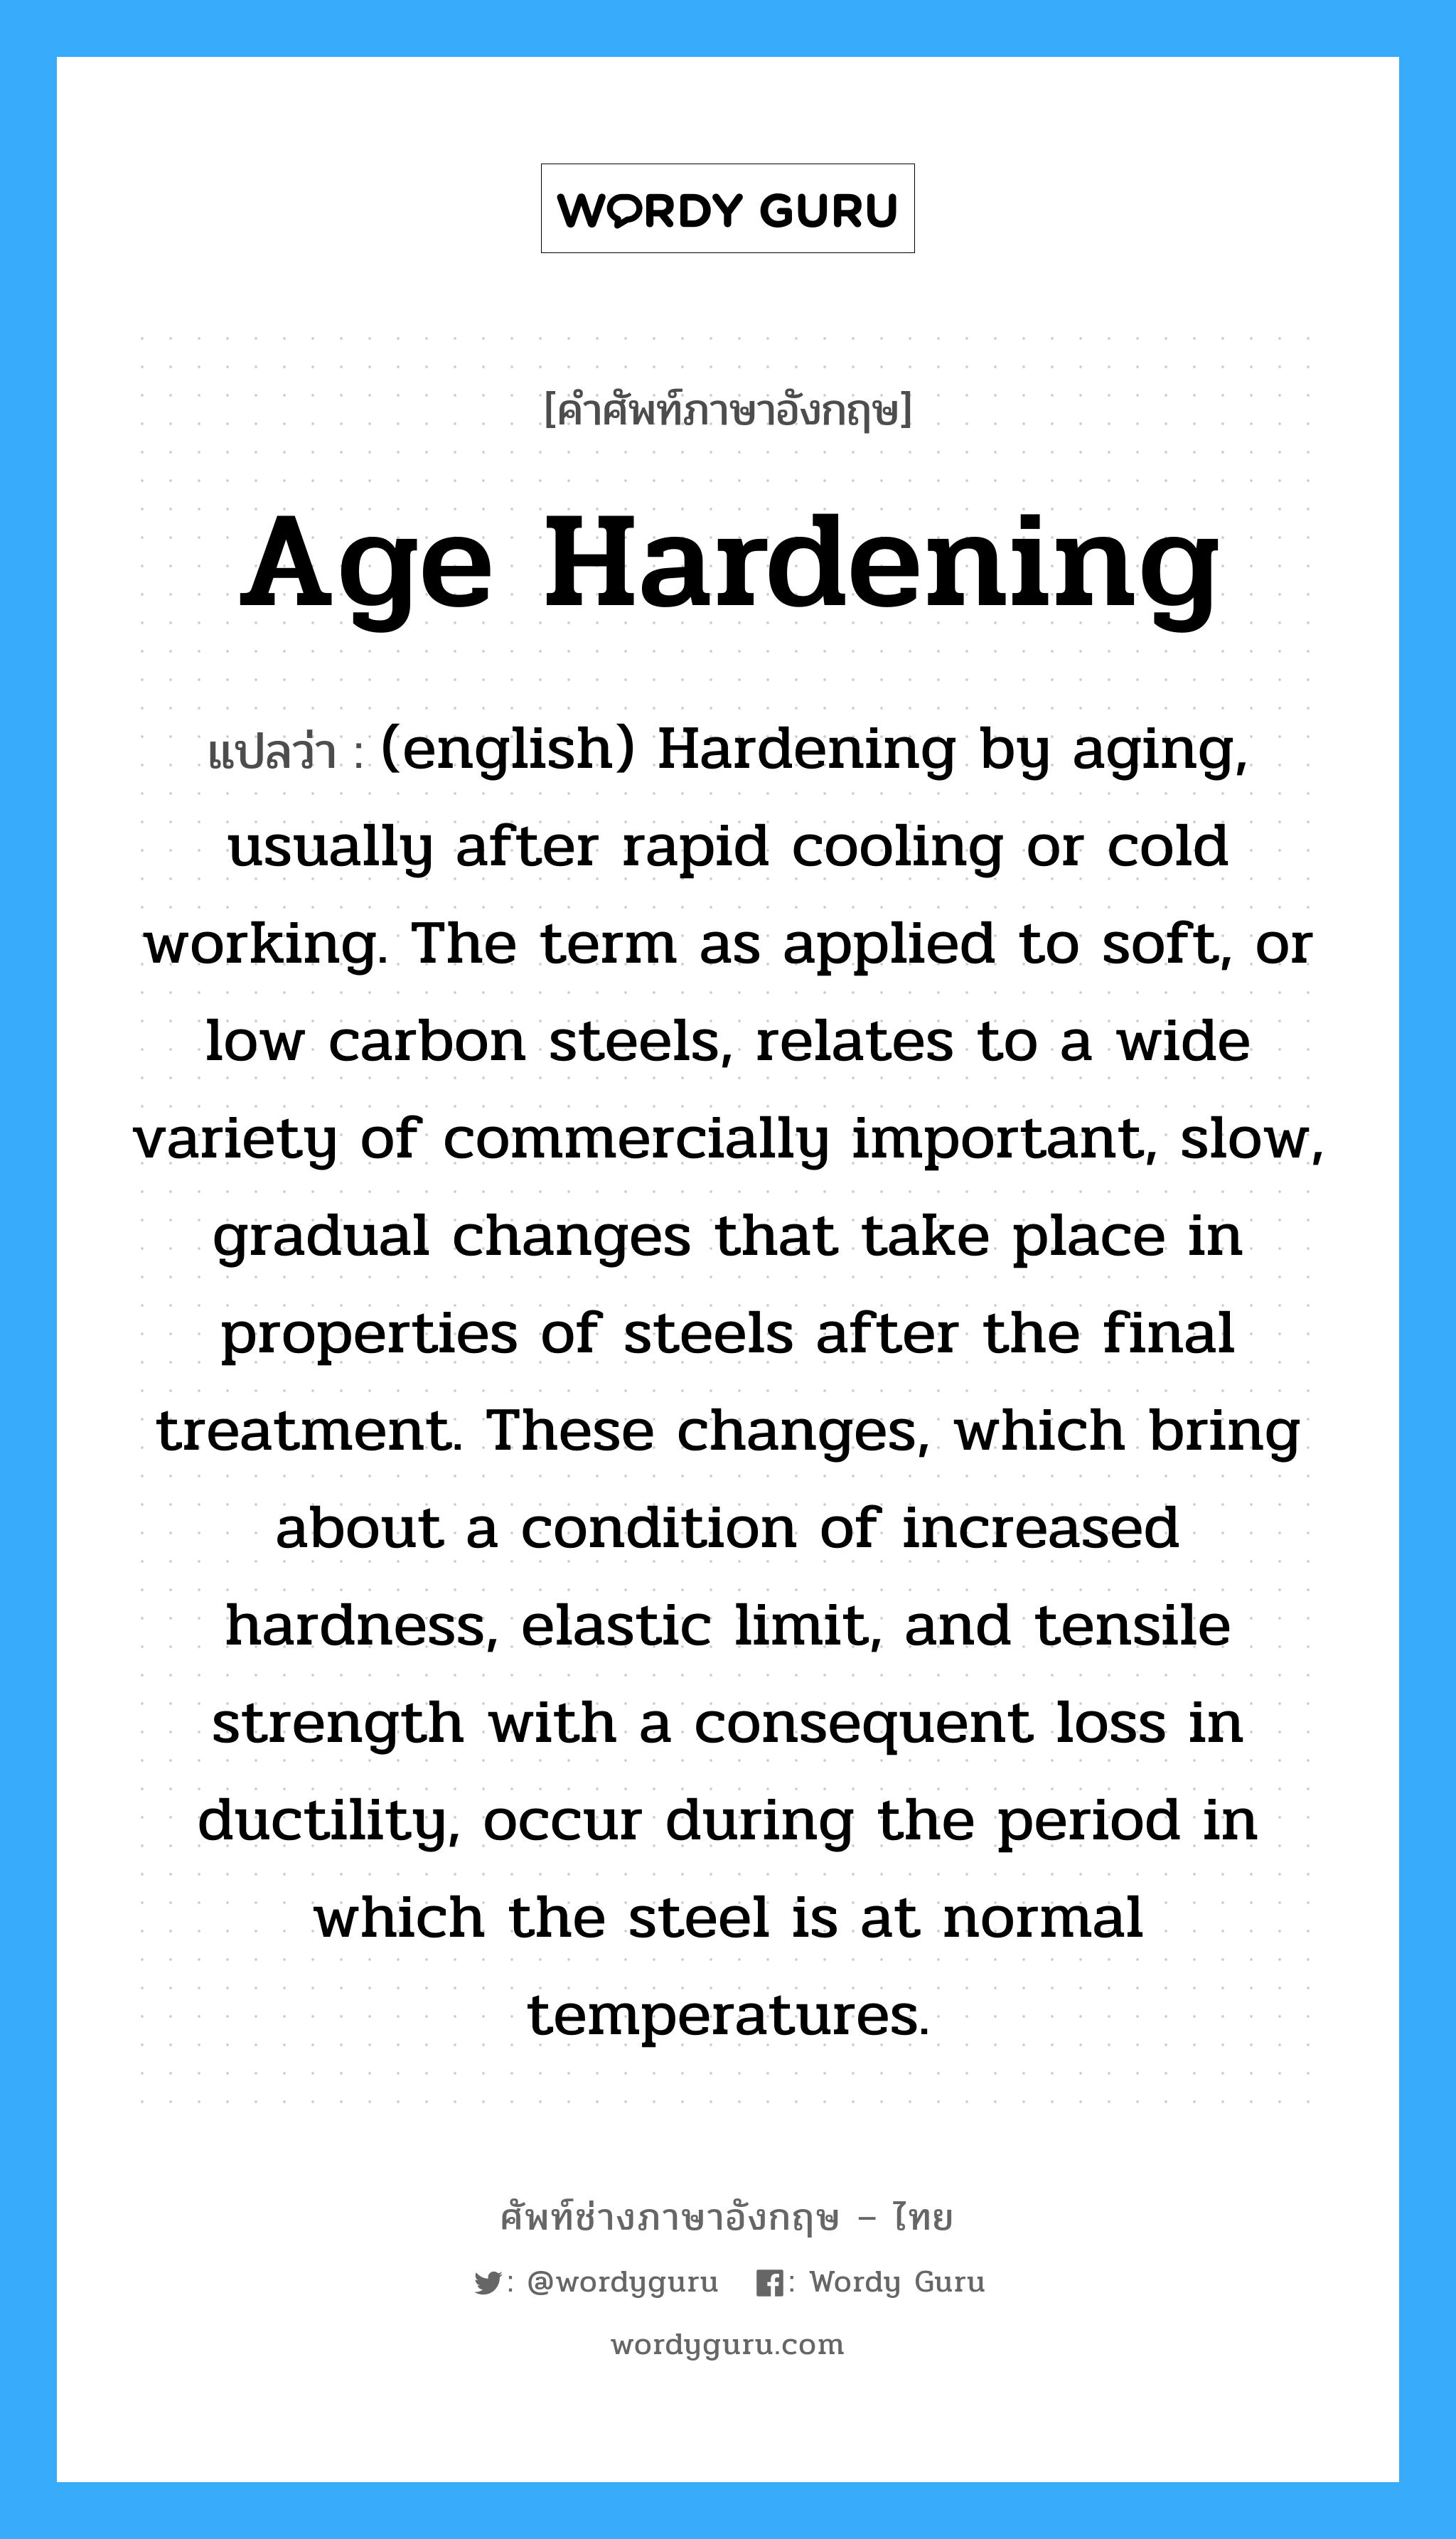 (english) Hardening by aging, usually after rapid cooling or cold working. The term as applied to soft, or low carbon steels, relates to a wide variety of commercially important, slow, gradual changes that take place in properties of steels after the final treatment. These changes, which bring about a condition of increased hardness, elastic limit, and tensile strength with a consequent loss in ductility, occur during the period in which the steel is at normal temperatures. ภาษาอังกฤษ?, คำศัพท์ช่างภาษาอังกฤษ - ไทย (english) Hardening by aging, usually after rapid cooling or cold working. The term as applied to soft, or low carbon steels, relates to a wide variety of commercially important, slow, gradual changes that take place in properties of steels after the final treatment. These changes, which bring about a condition of increased hardness, elastic limit, and tensile strength with a consequent loss in ductility, occur during the period in which the steel is at normal temperatures. คำศัพท์ภาษาอังกฤษ (english) Hardening by aging, usually after rapid cooling or cold working. The term as applied to soft, or low carbon steels, relates to a wide variety of commercially important, slow, gradual changes that take place in properties of steels after the final treatment. These changes, which bring about a condition of increased hardness, elastic limit, and tensile strength with a consequent loss in ductility, occur during the period in which the steel is at normal temperatures. แปลว่า Age Hardening